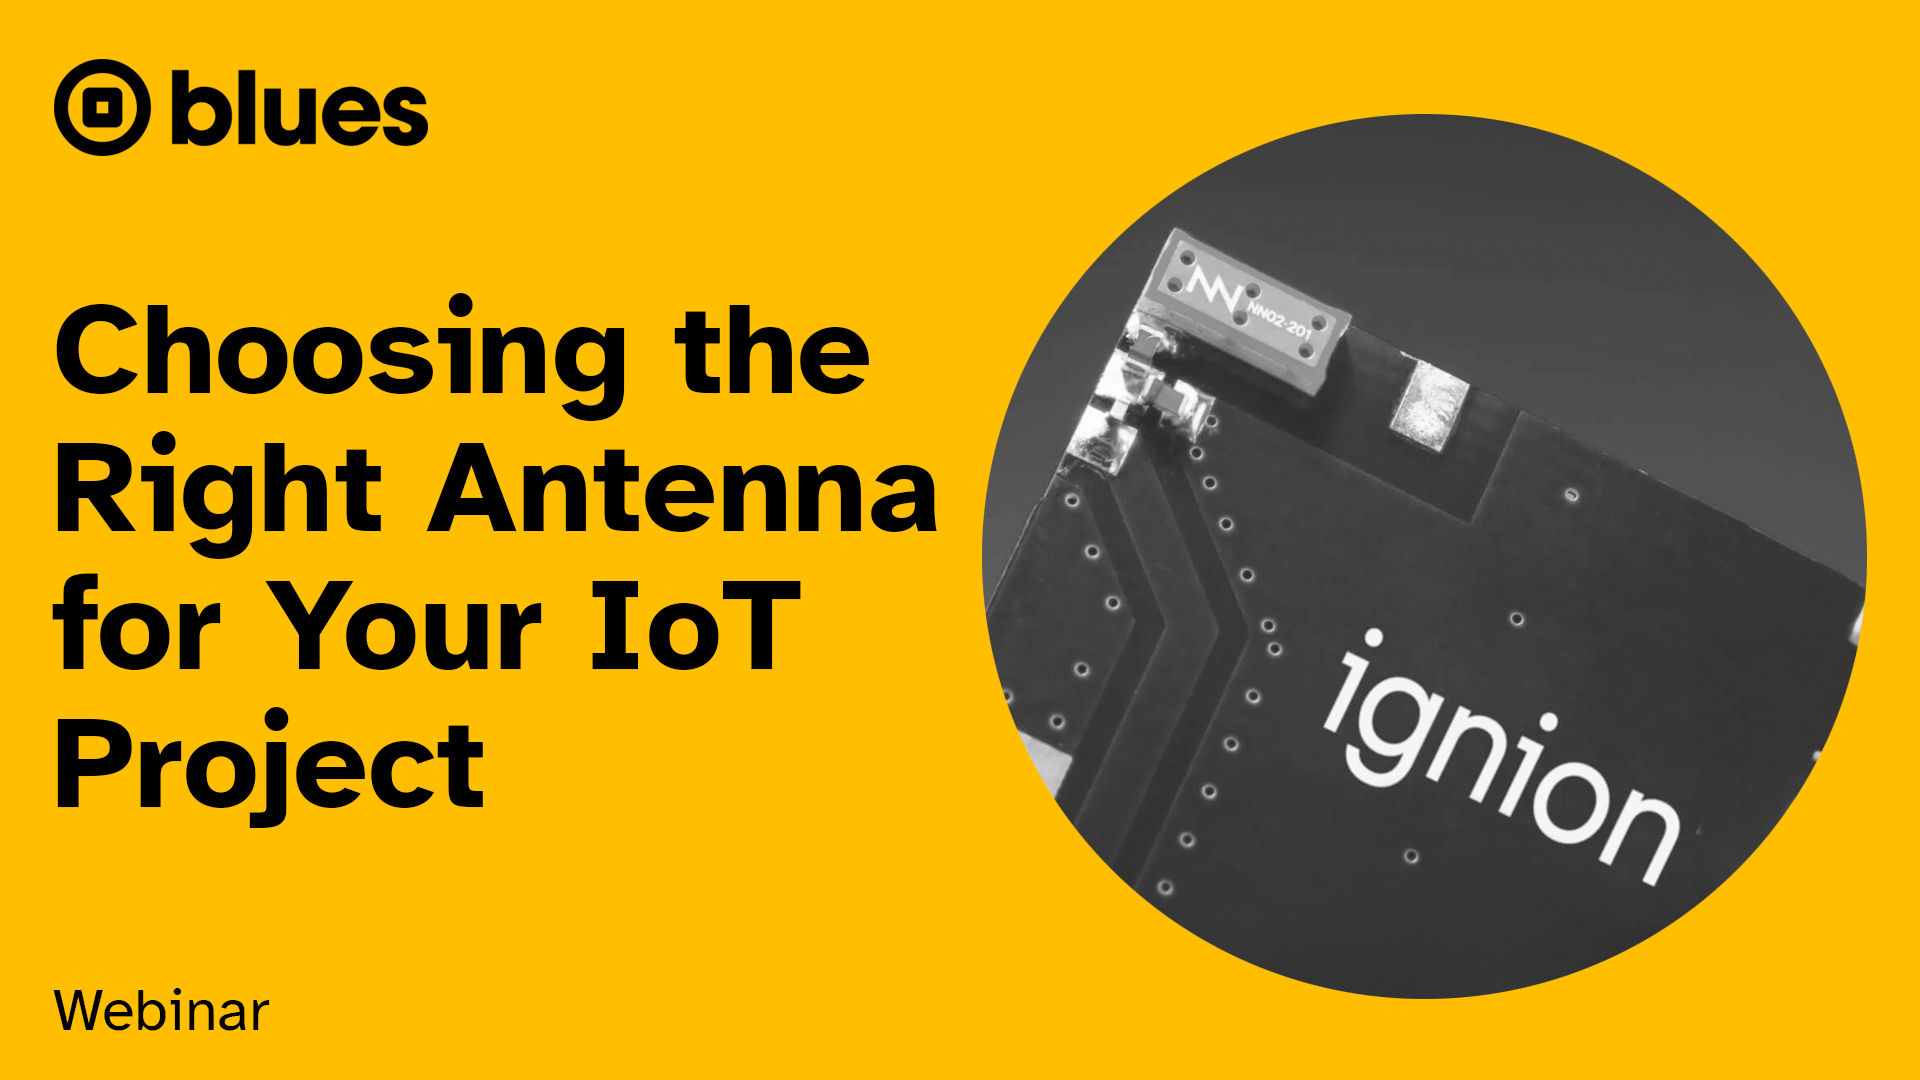 50 ways to accelerate your iot project